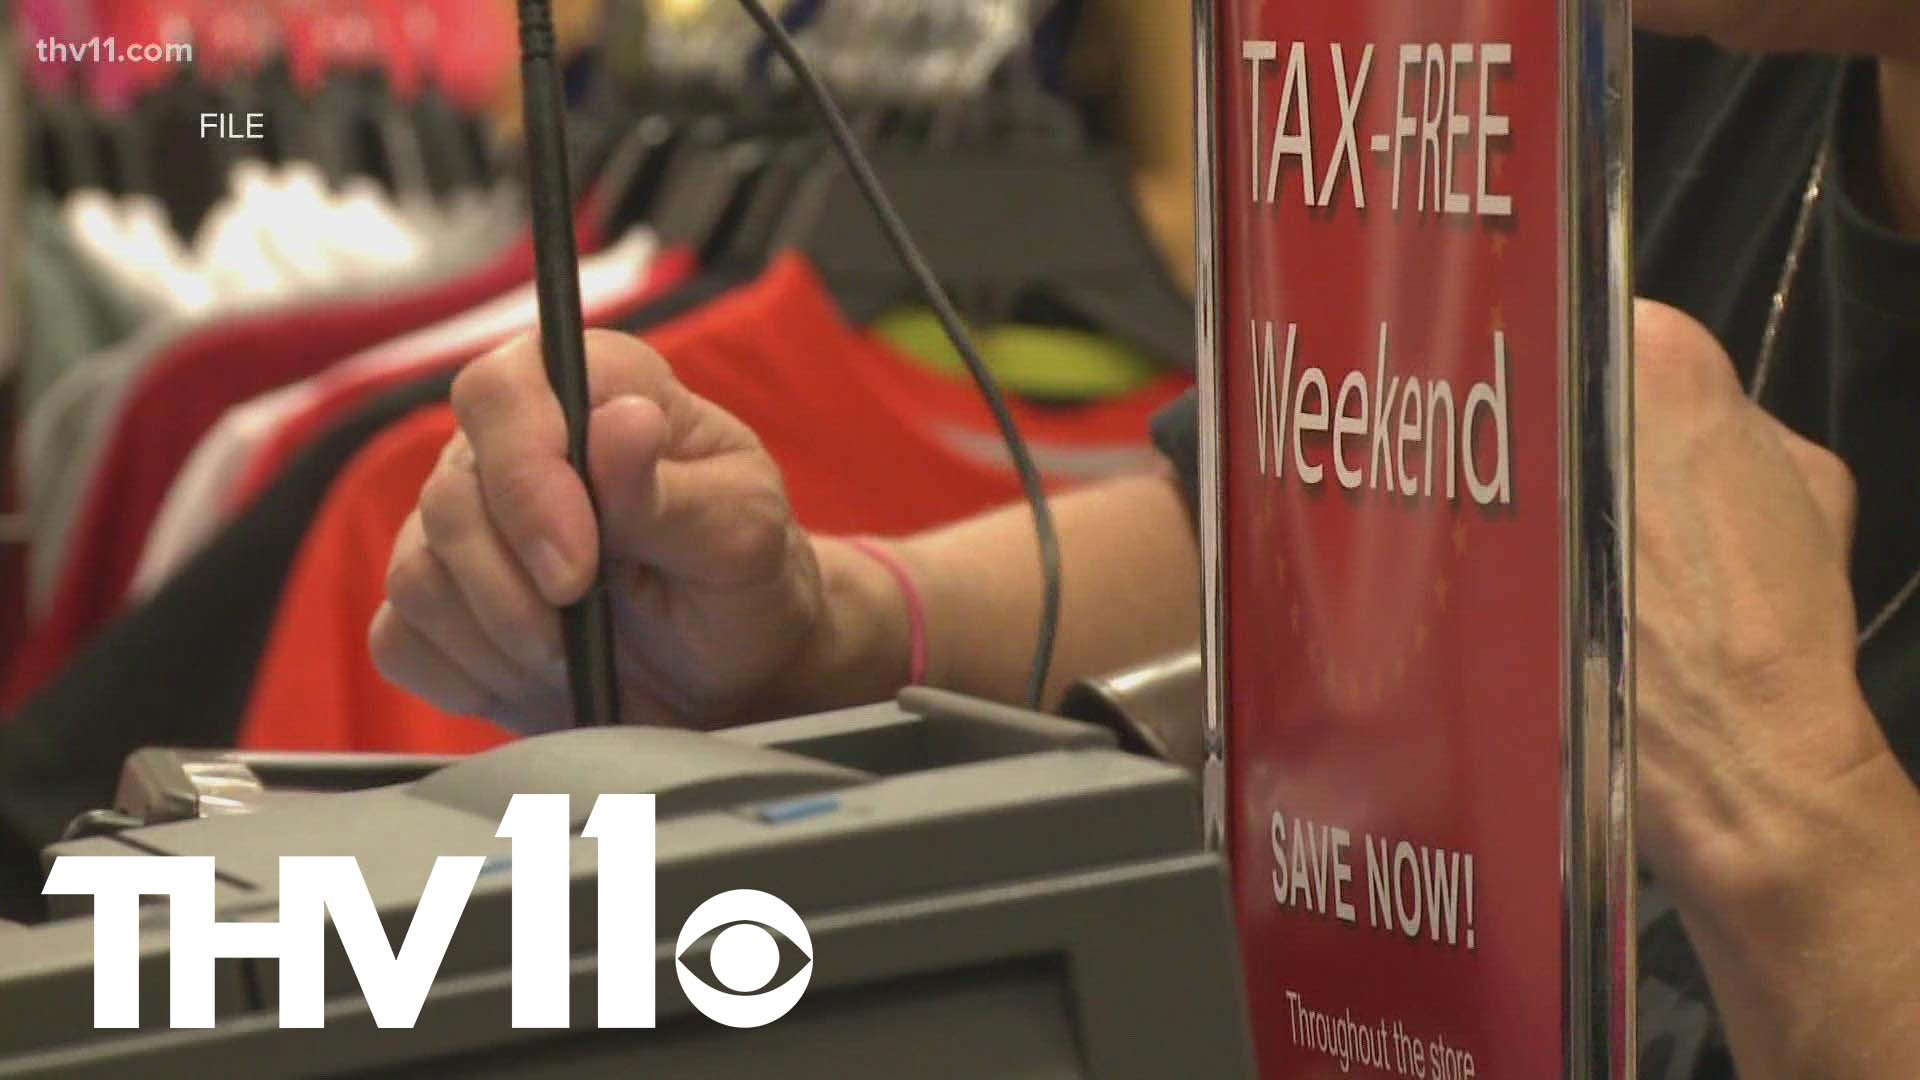 With Tax Free Weekend set to begin this coming weekend, here's the latest on what Arkansans should expect.